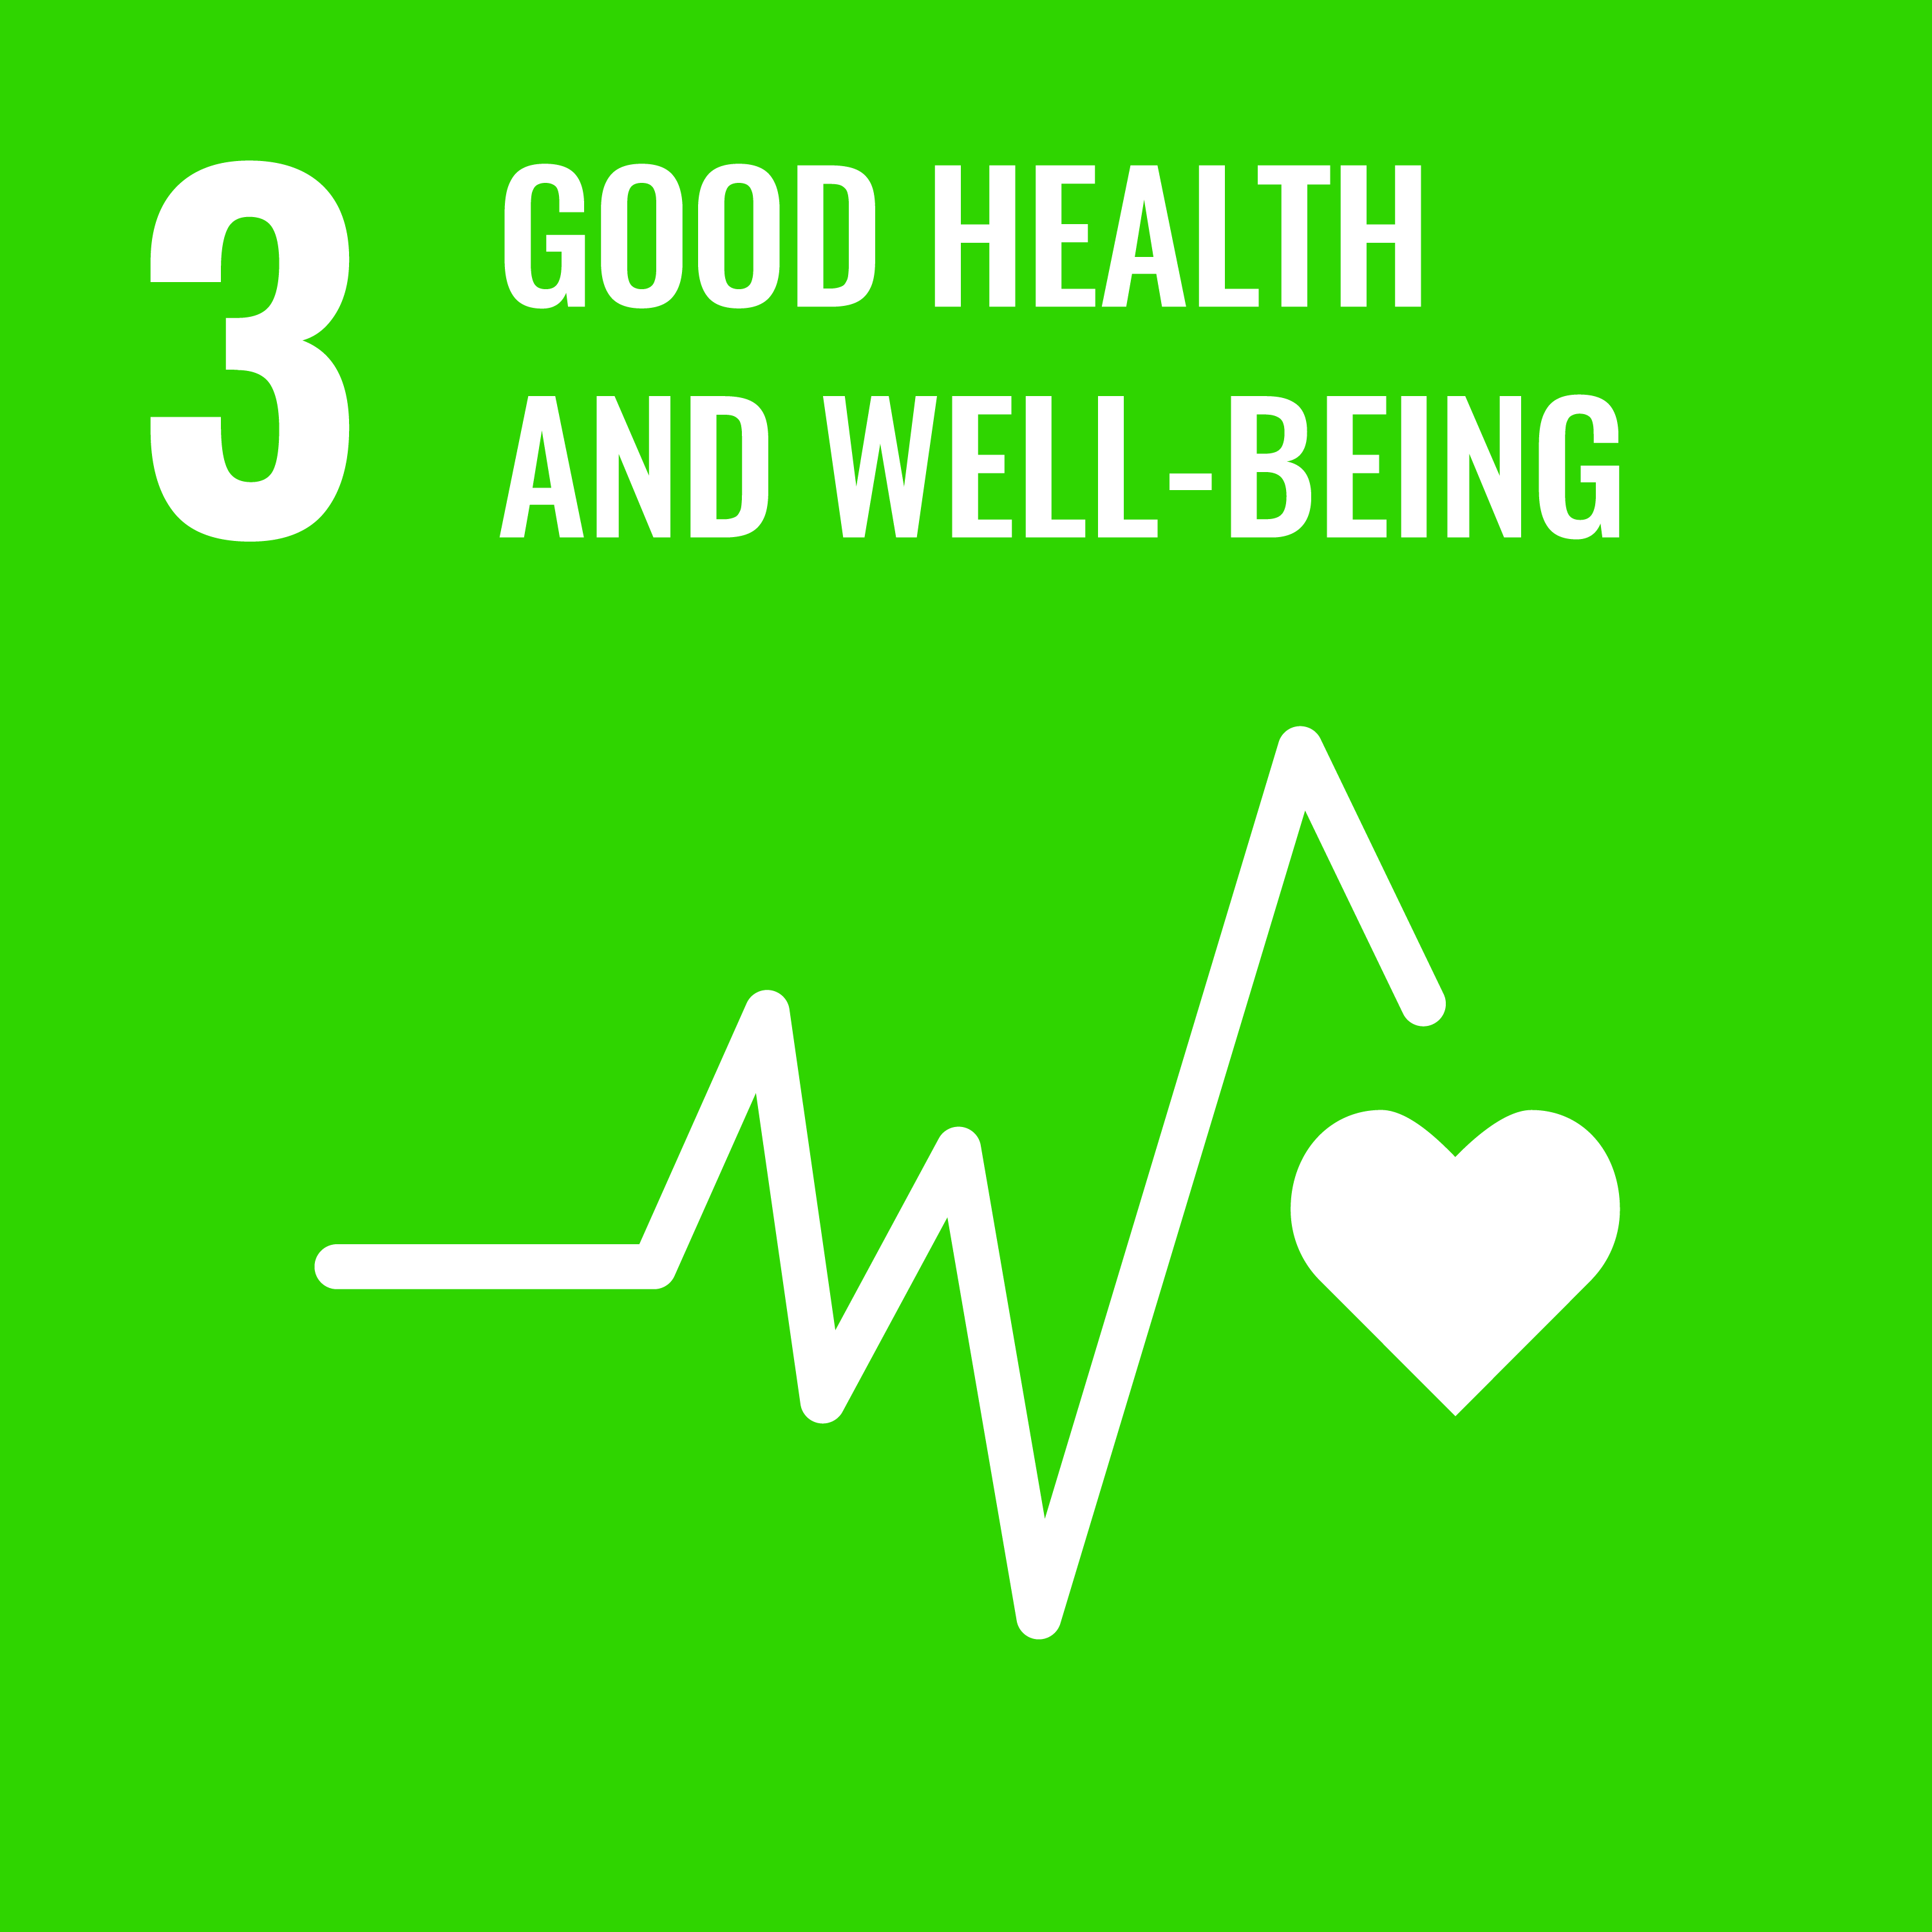 Our contribution to SDG 3